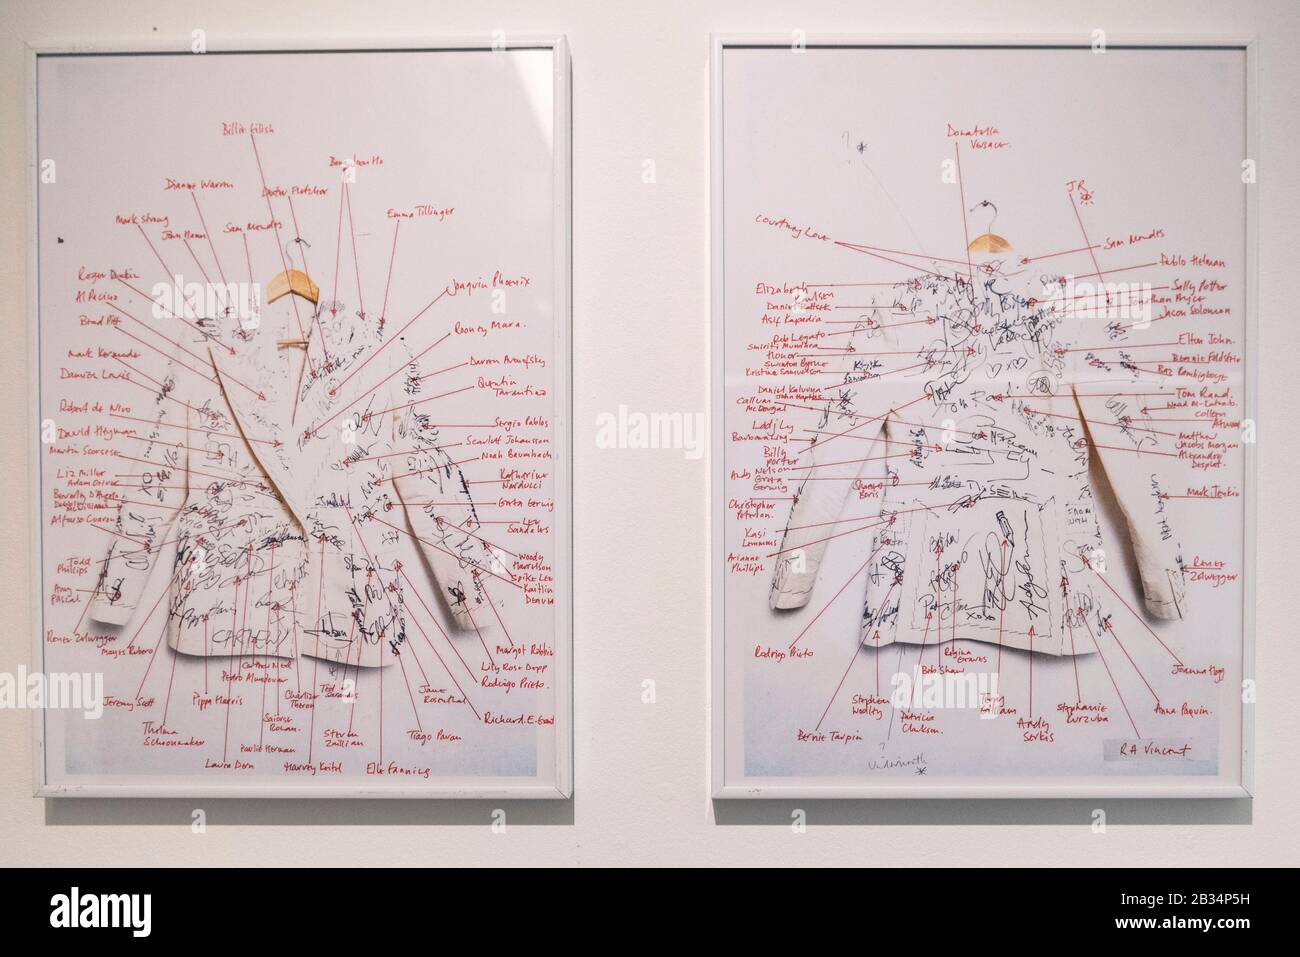 London, UK.  4 March 2020. Annotations to identify stars' autographs. A suit designed by Academy-Award winning costume designer Sandy Powell is on display ahead of being offered for auction at Phillips, Berkeley Square.  Worn by Powell at the 2020 BAFTAs and Oscars, the cream calico toile suit includes autographs from over 100 movie stars.   Proceeds will go towards Art Fund's public appeal to save and protect Prospect Cottage in Dungeness, Kent, home of filmmaker Derek Jarman. Credit: Stephen Chung/Alamy Live News Stock Photo